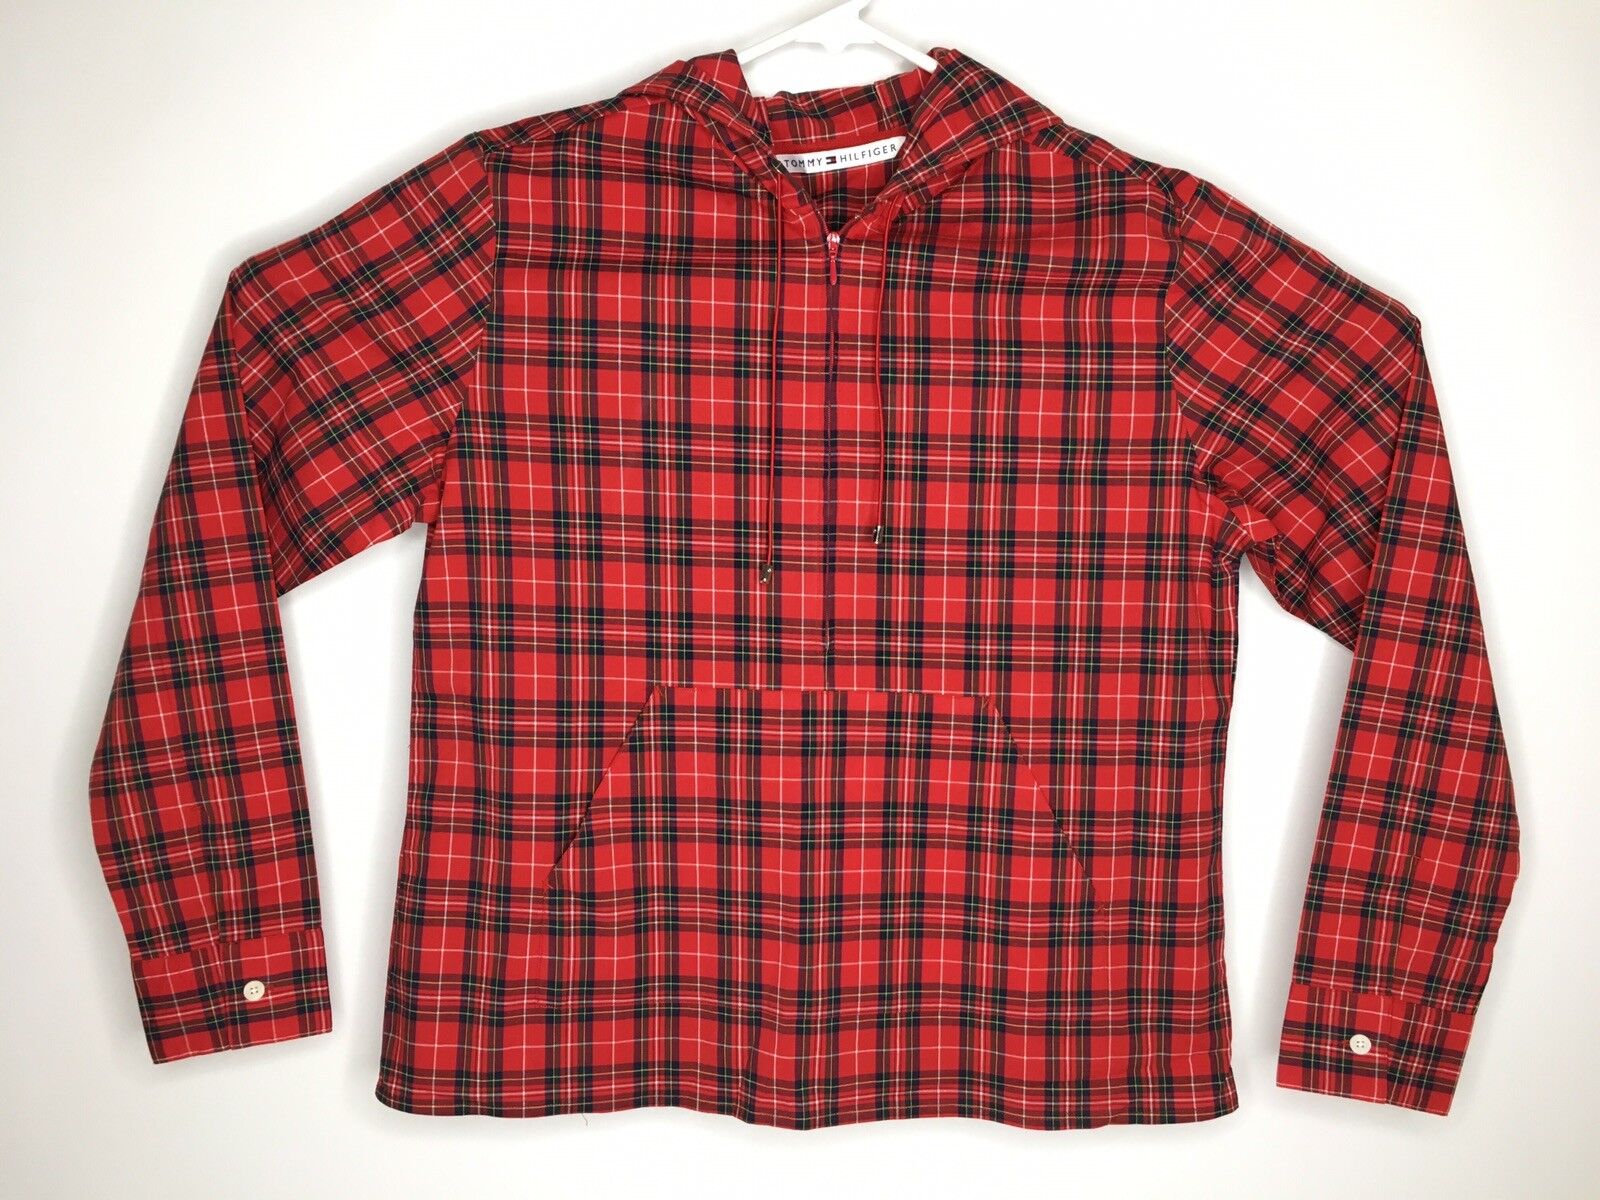 Women’s Tommy Hilfiger Red Plaid Stretch Cotton Pullover Shirt/Jacket Size 8 EUC